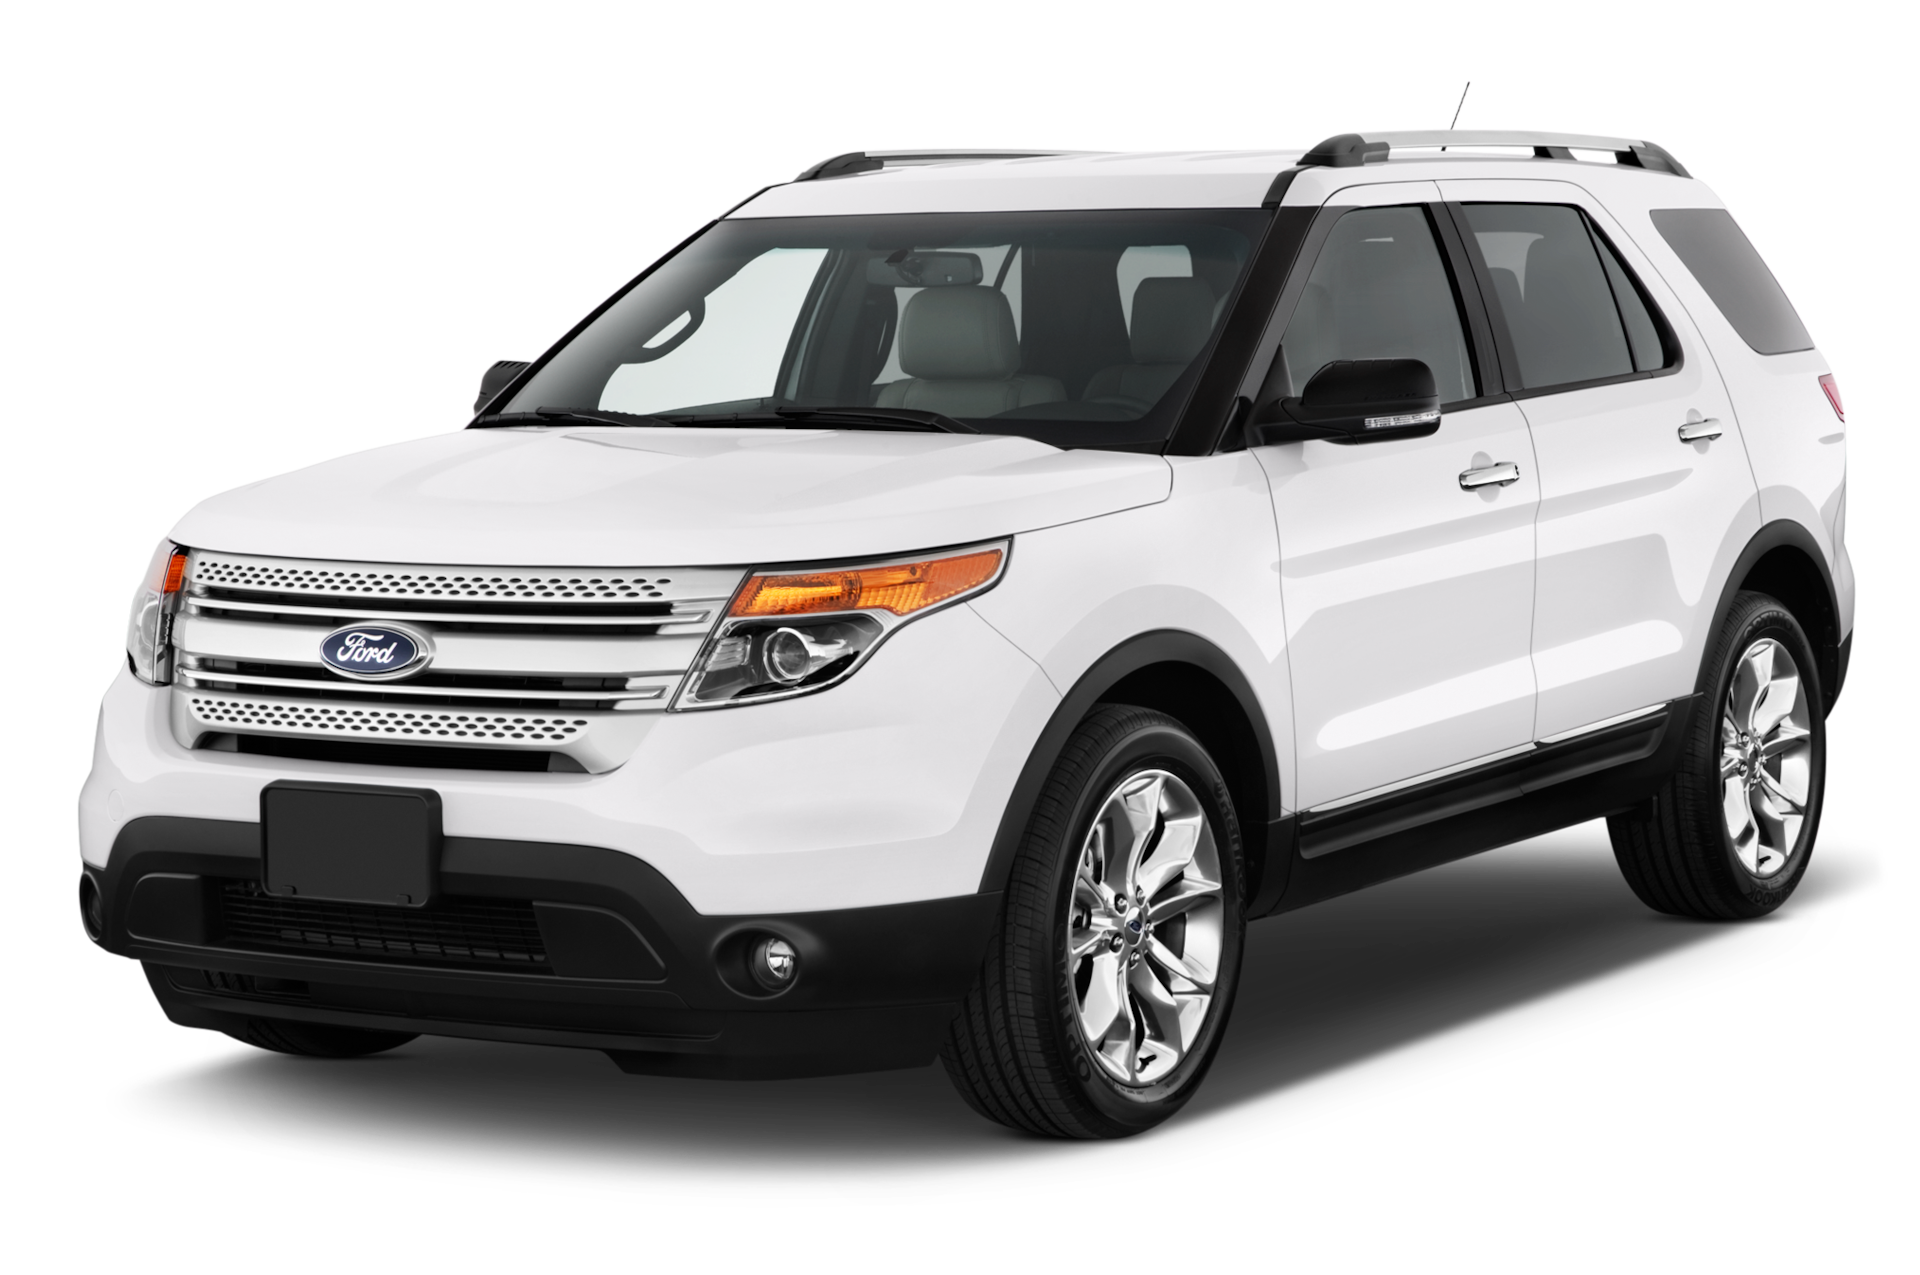 2014 Ford Explorer Prices, Reviews, and Photos - MotorTrend